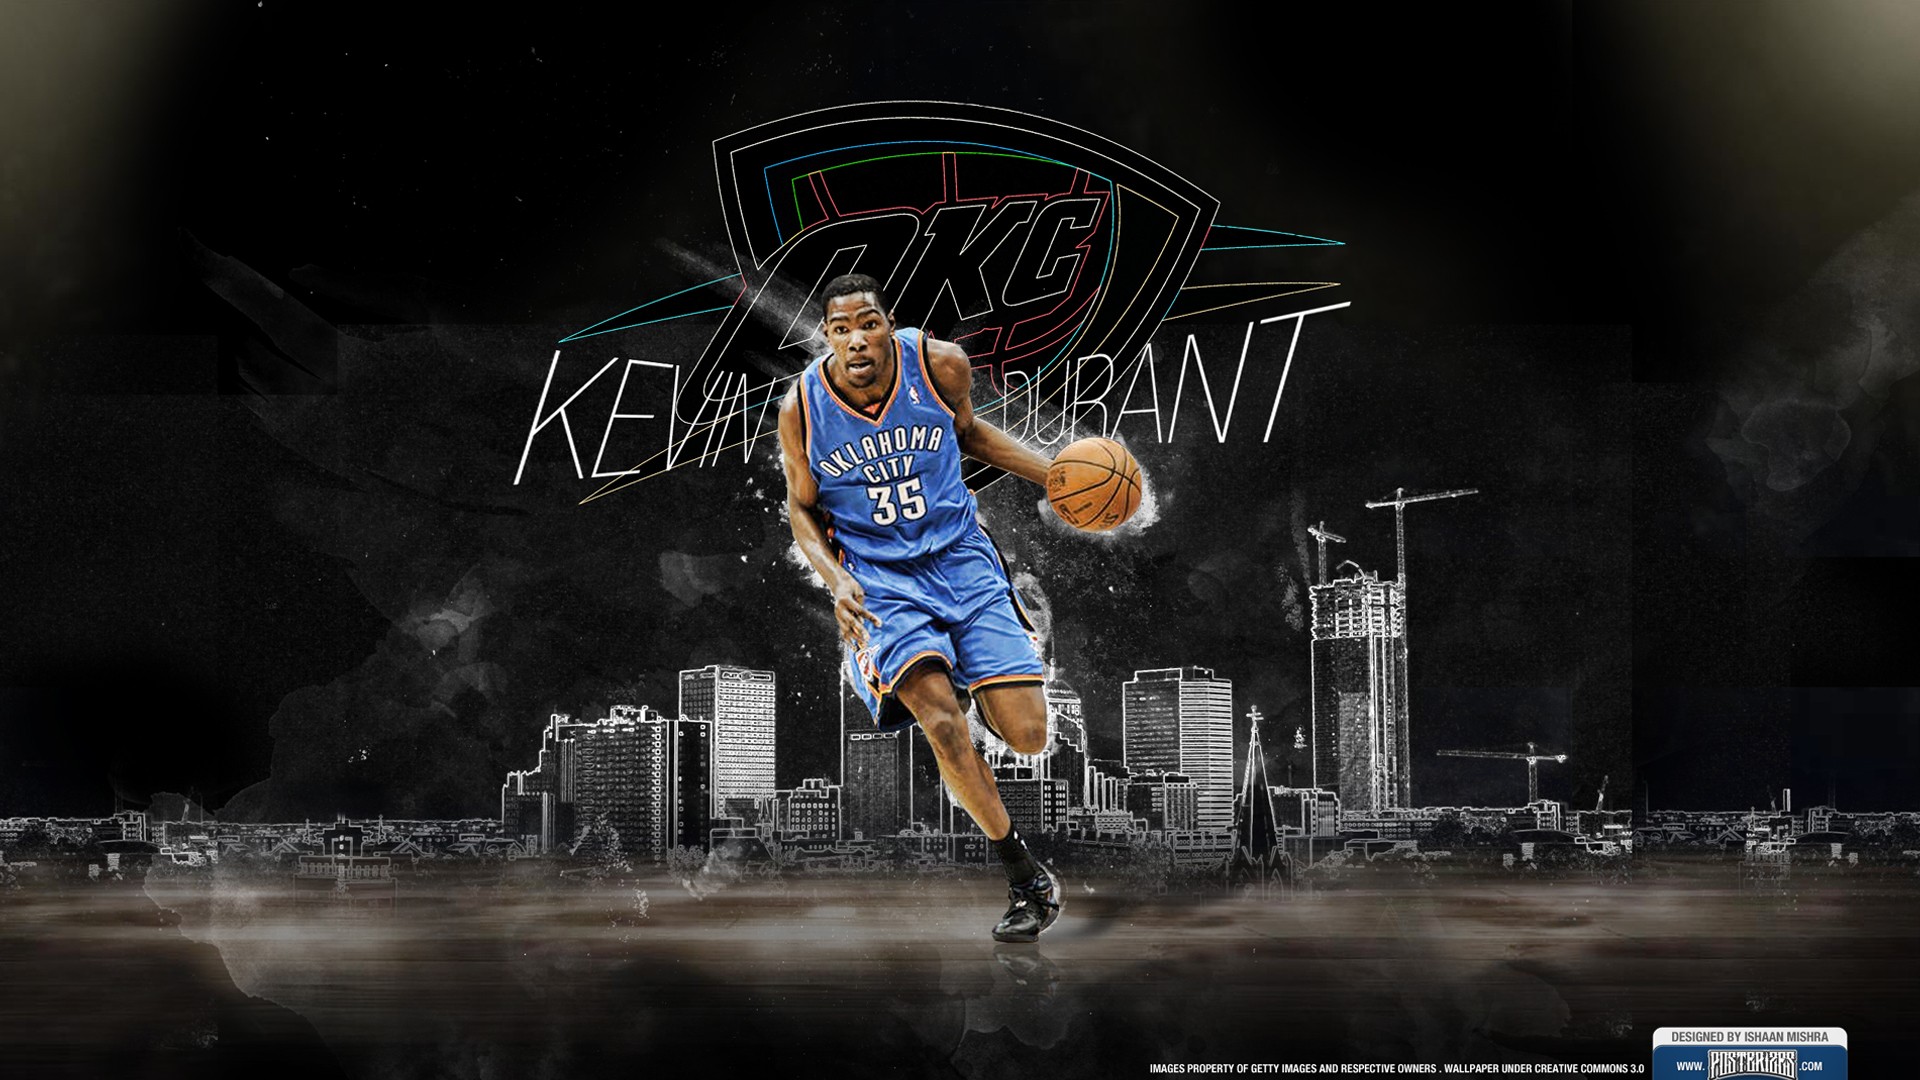 Wallpapers Kevin Durant Logo Full Hd 1920x1080 | #404430 #kevin ...